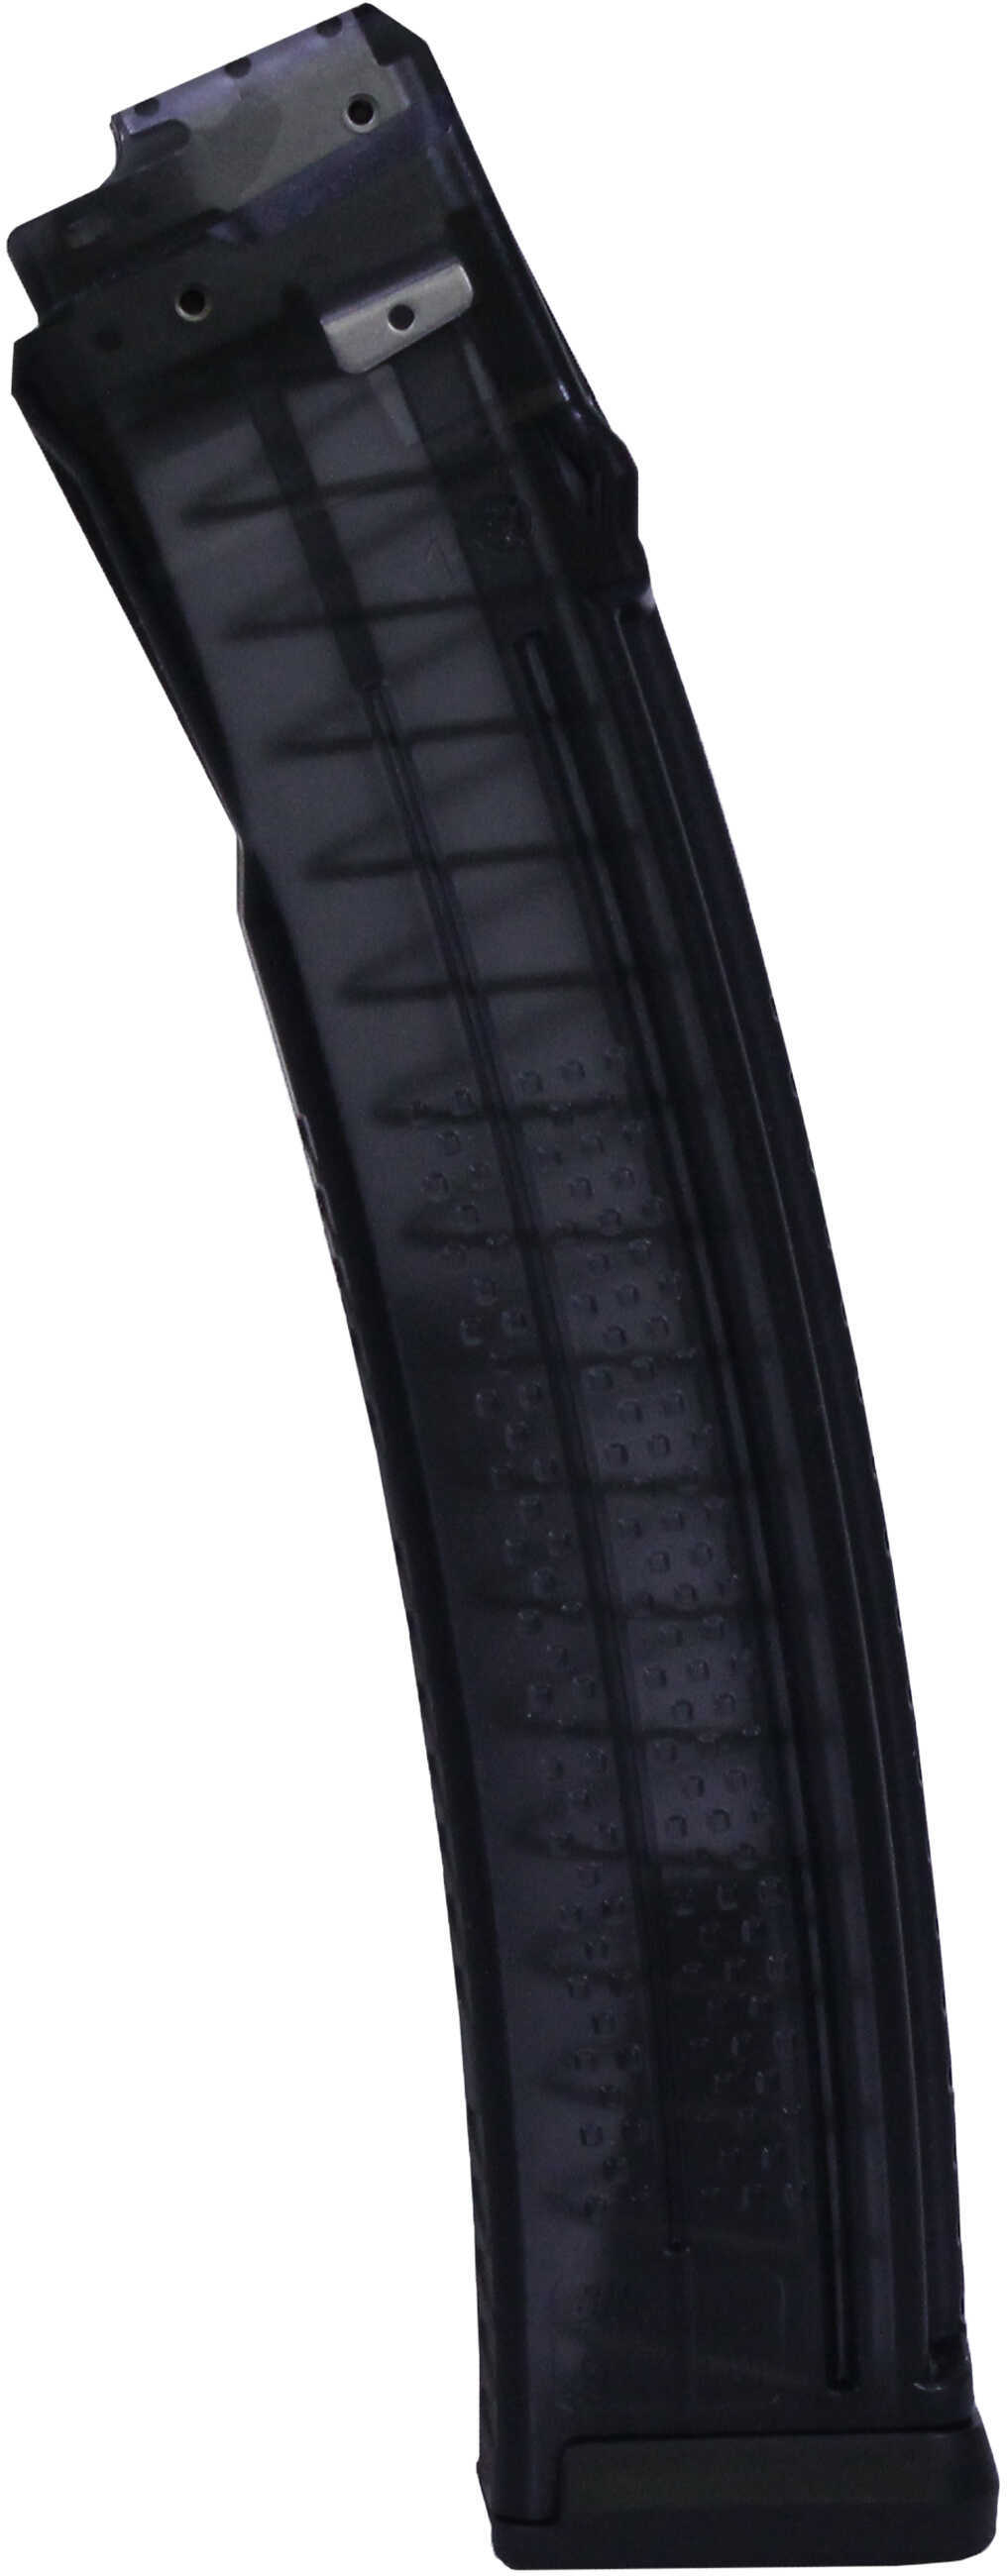 SigTac MPX Magazine 9mm, Gen II, 30 Rounds, Black Md: MAG-MPX-9-30-KM